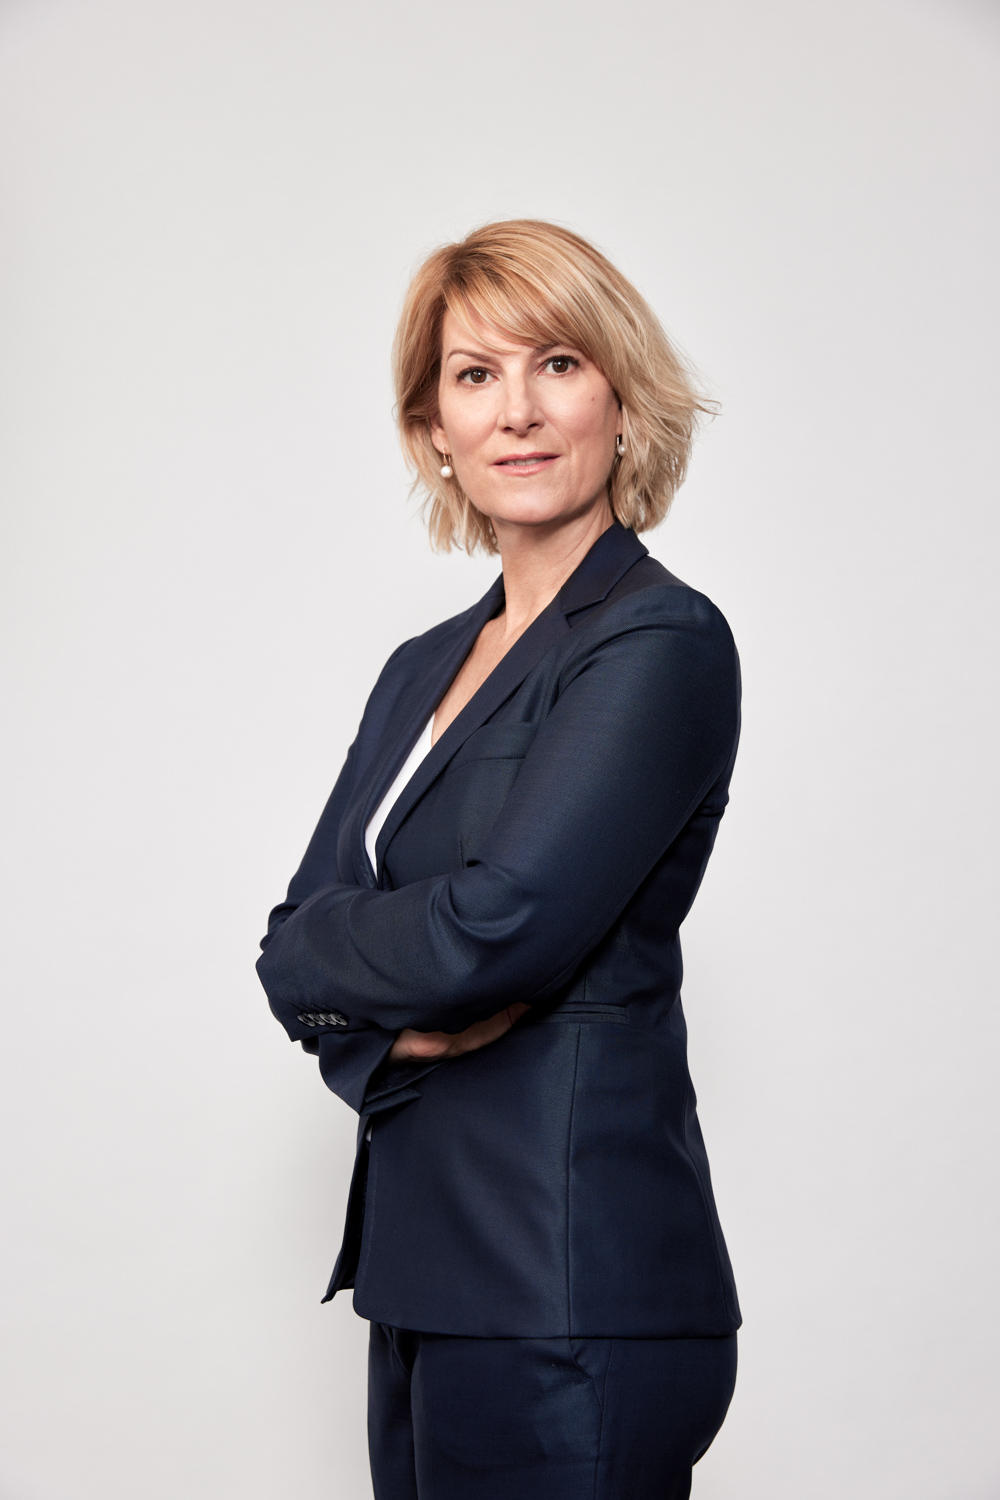 Philippa Honner, Founder, CEO